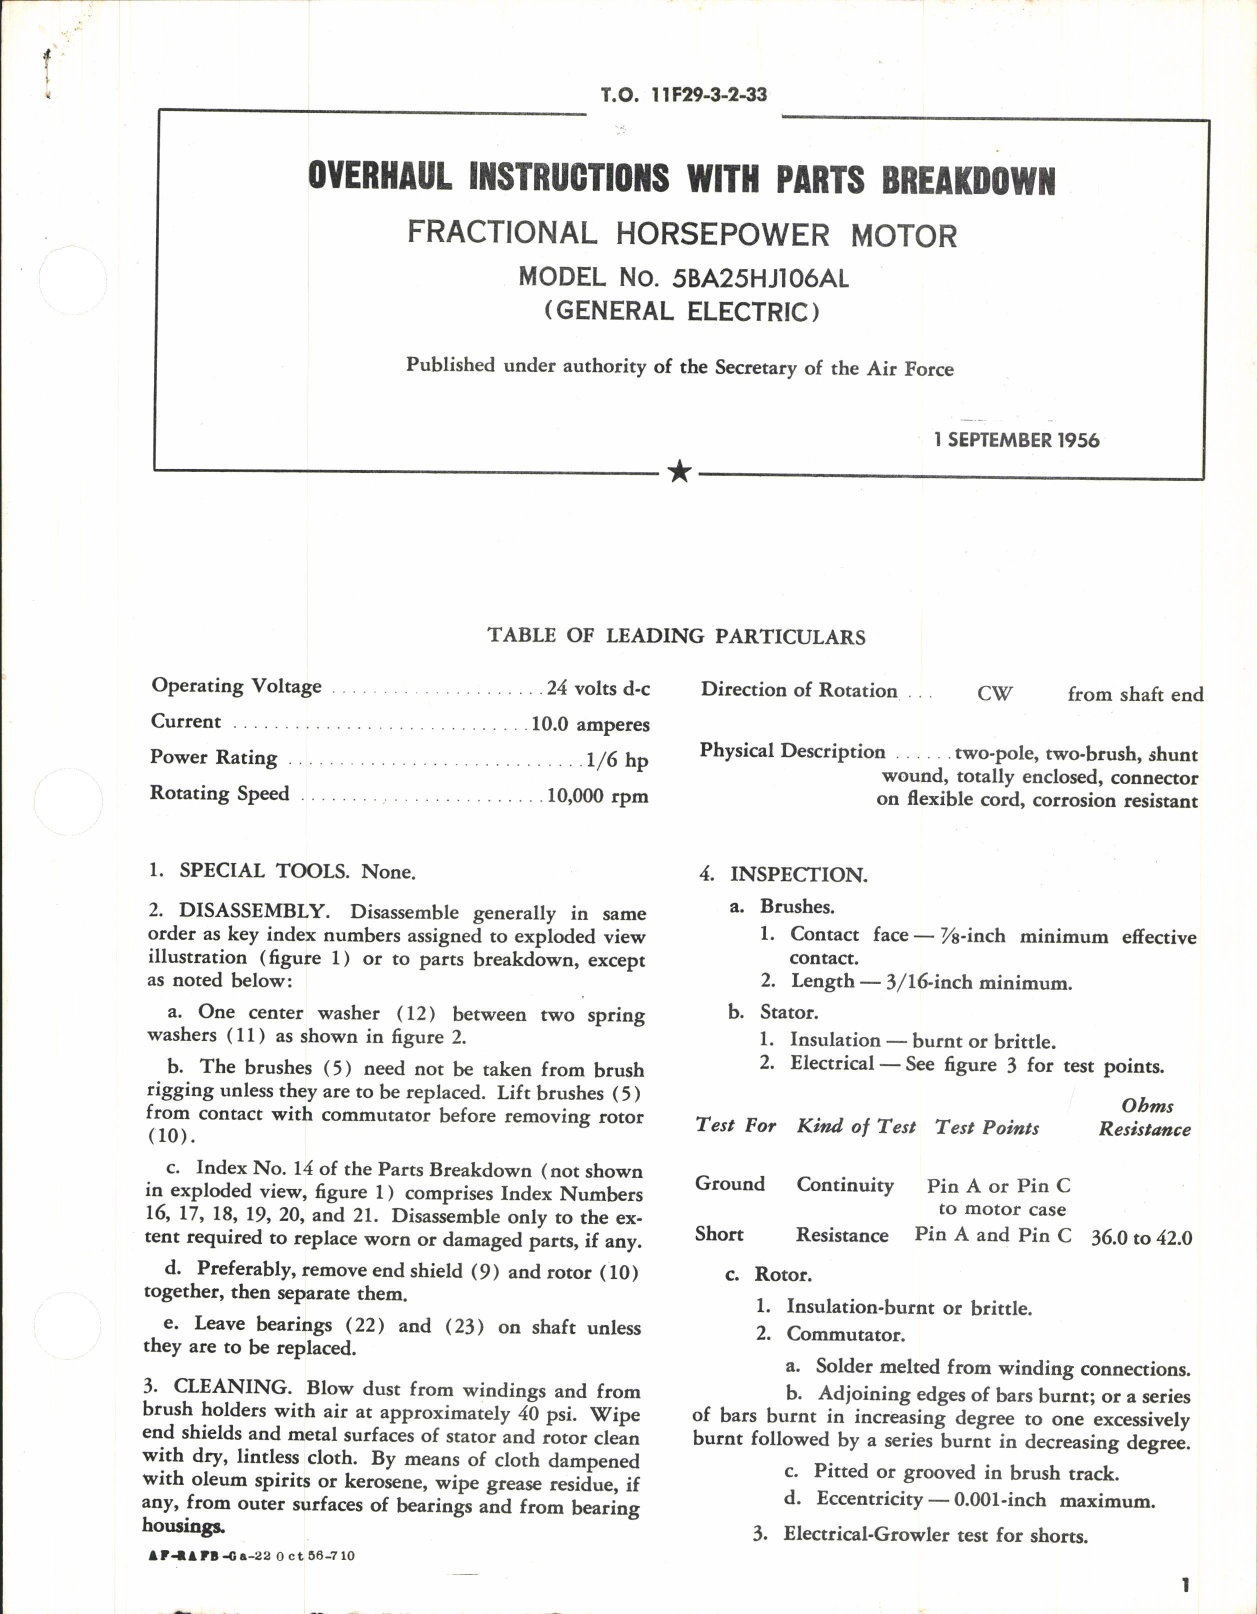 Sample page 1 from AirCorps Library document: Overhaul Instructions with Parts Breakdown for Fractional Horsepower Motor Model No. 5BA25HJ106AL